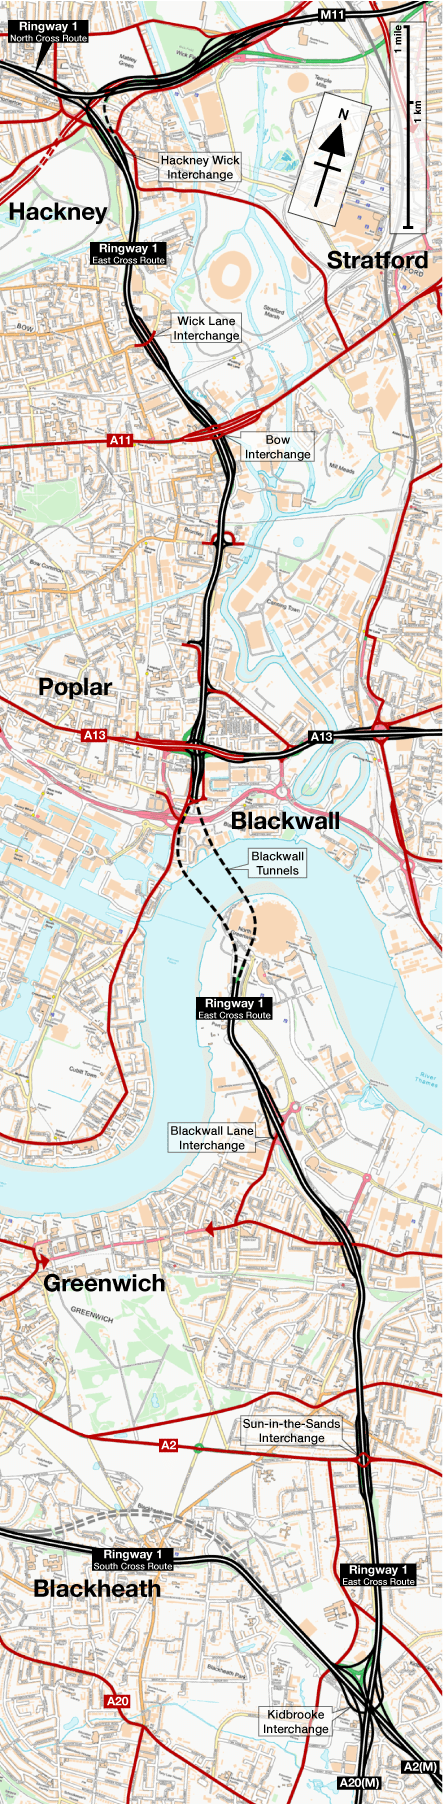 Ringway 1 East Cross Route map